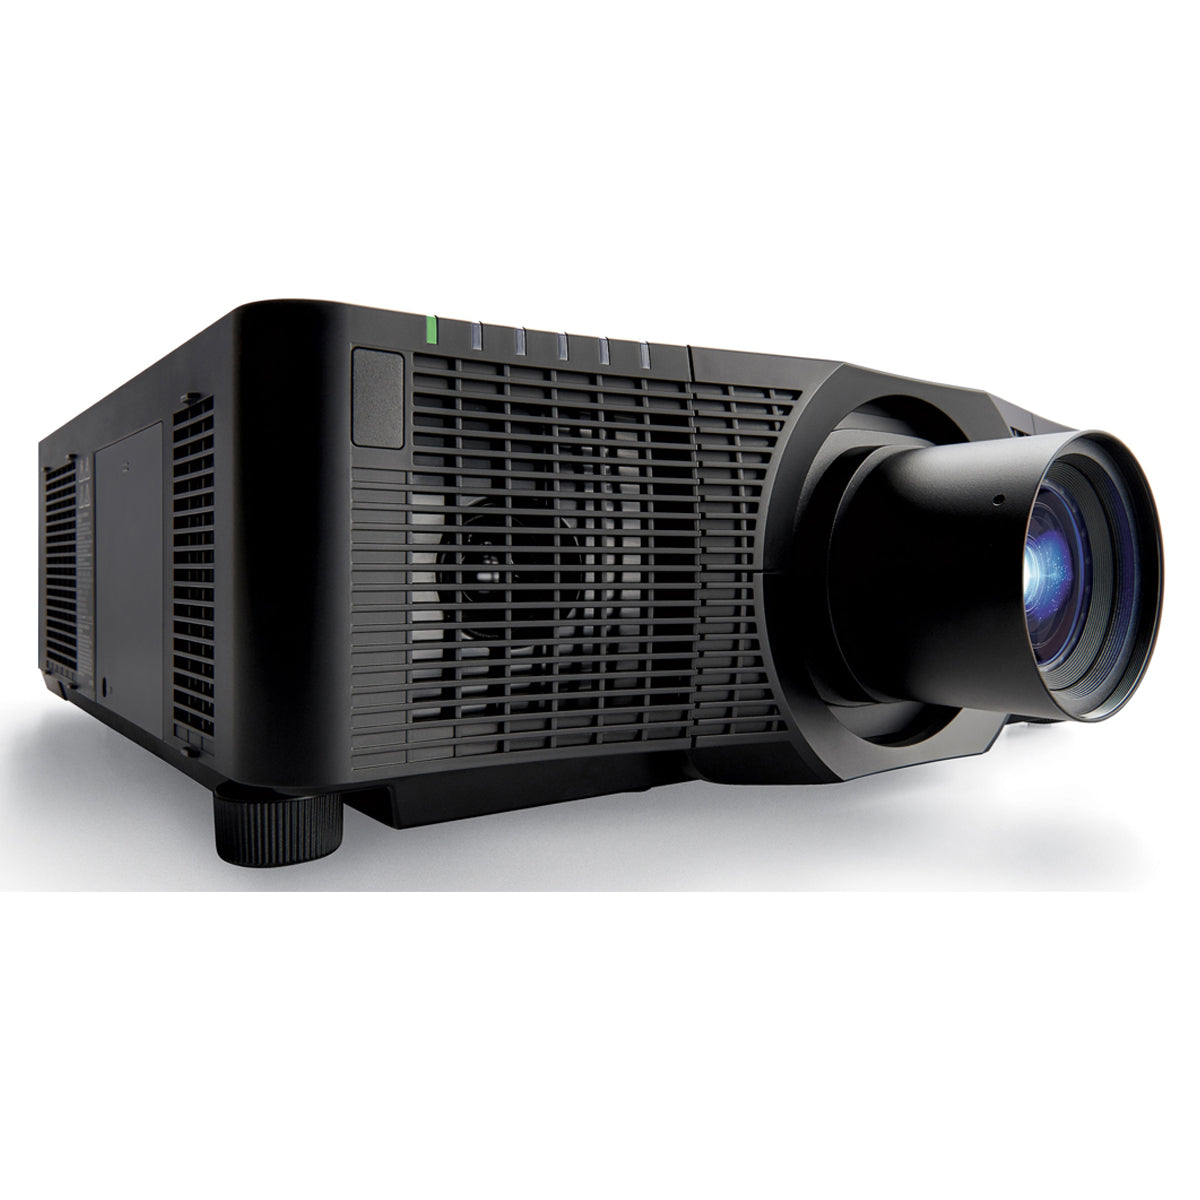 Christie LHD720i Projector (Black) (Body only) 3LCD, HD, 7,650 ISO lumens, single lamp